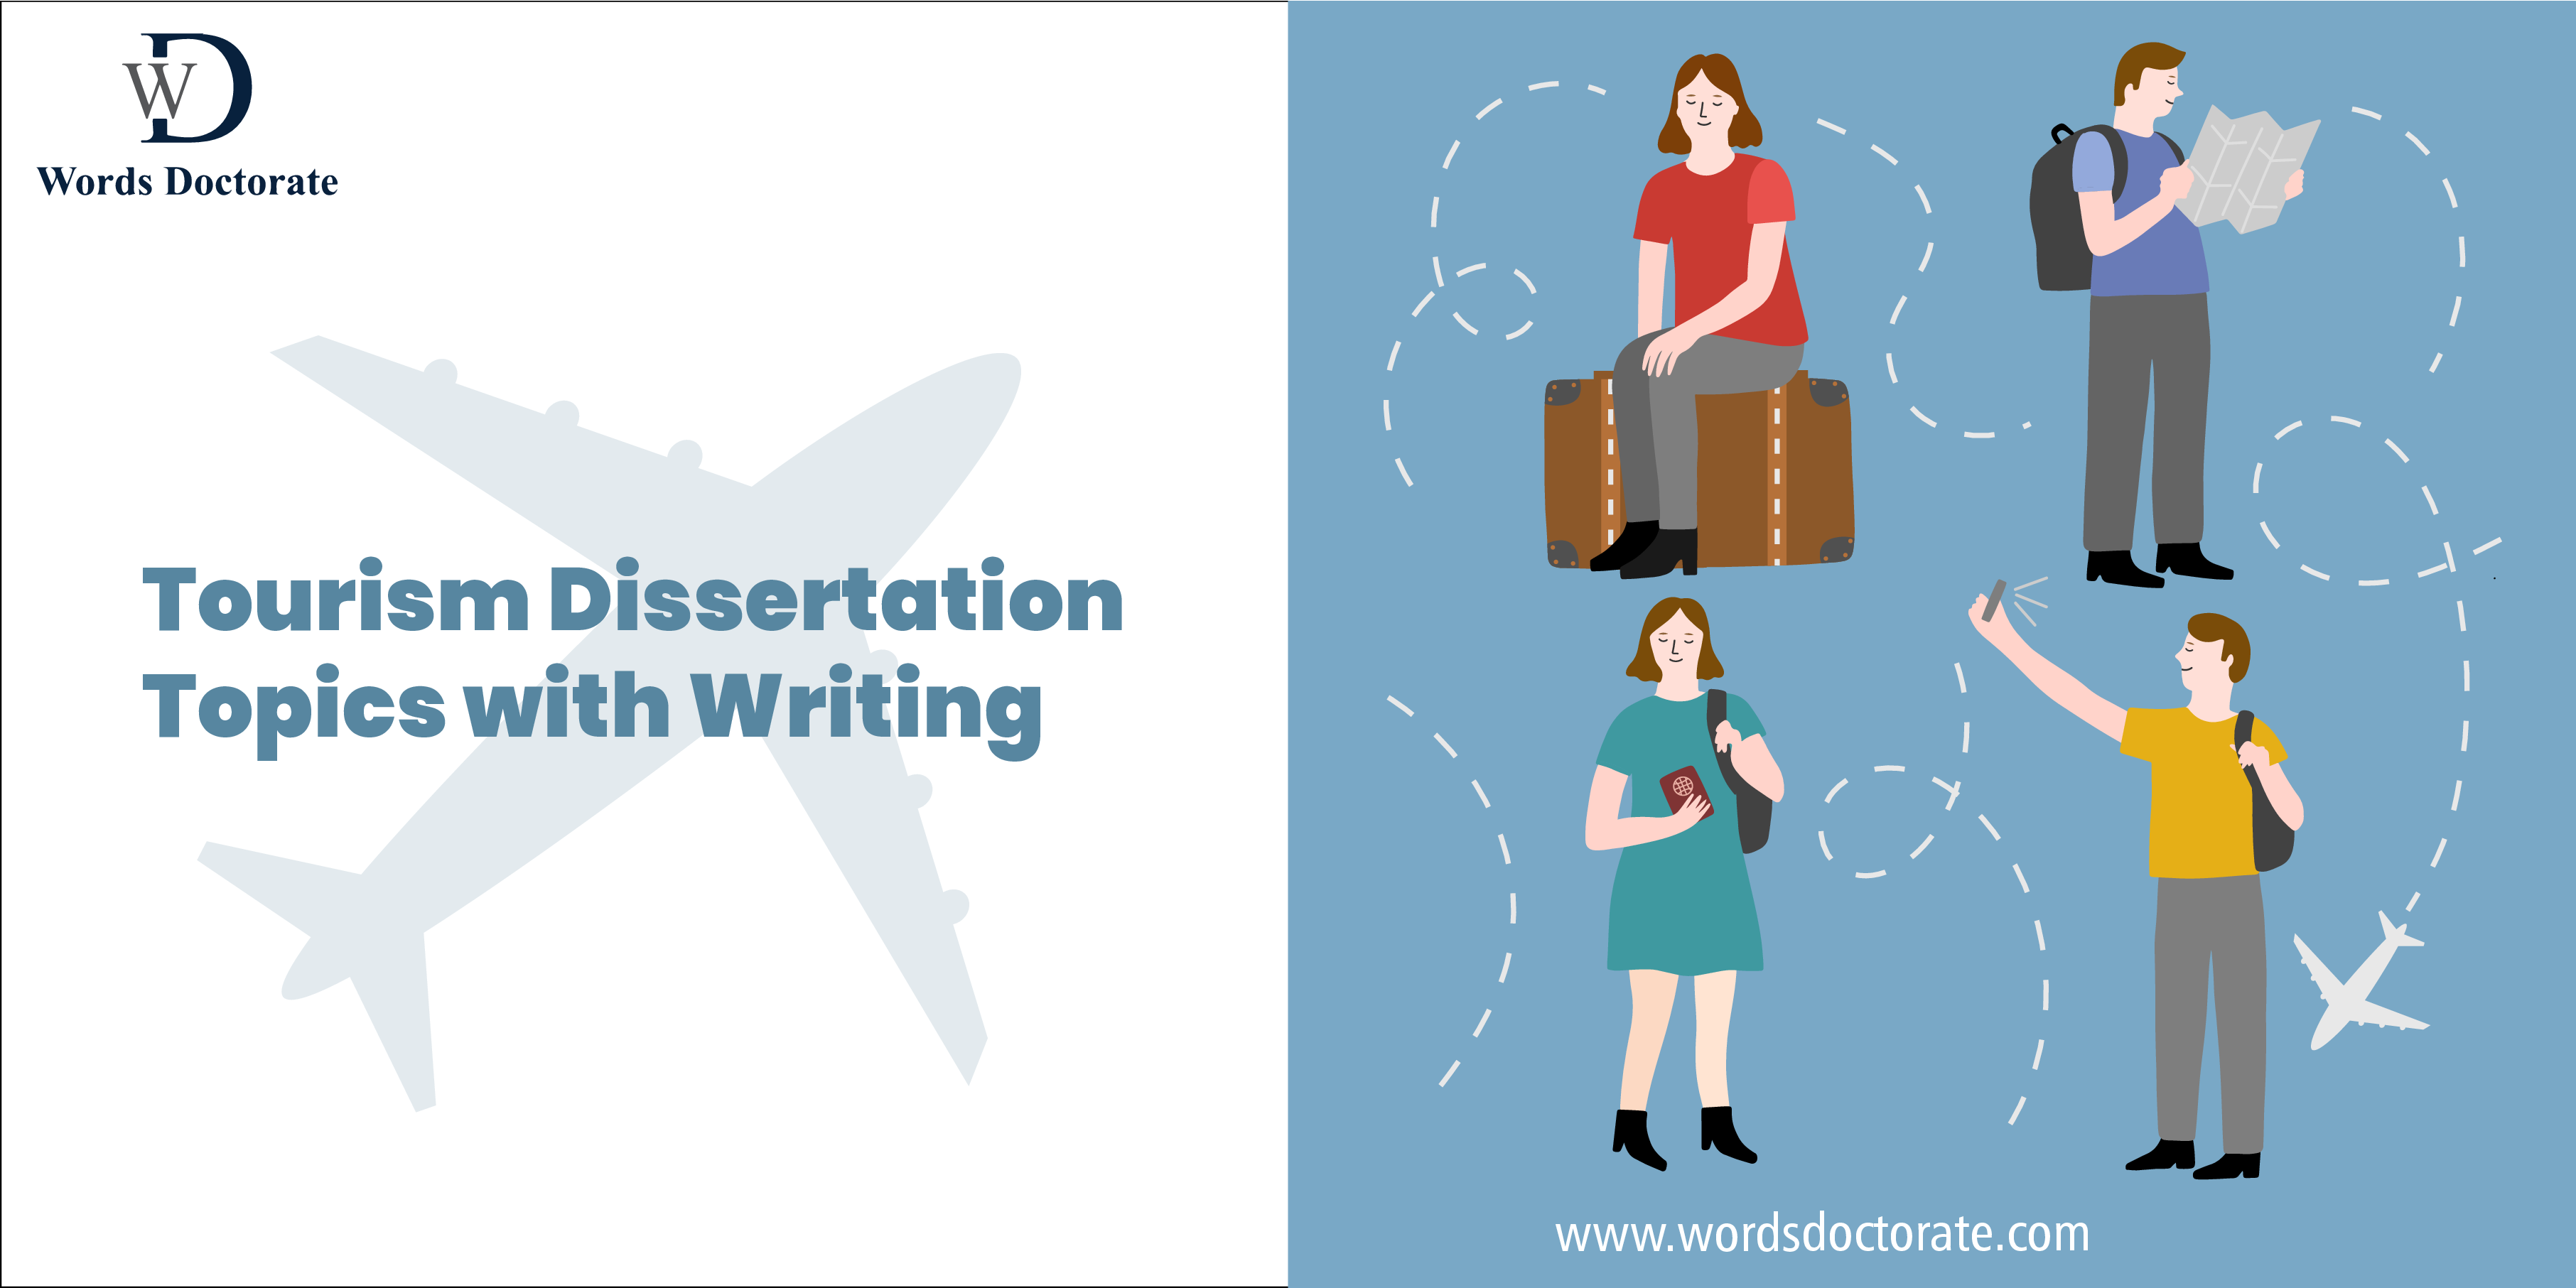 Tourism Dissertation Topics with Writing